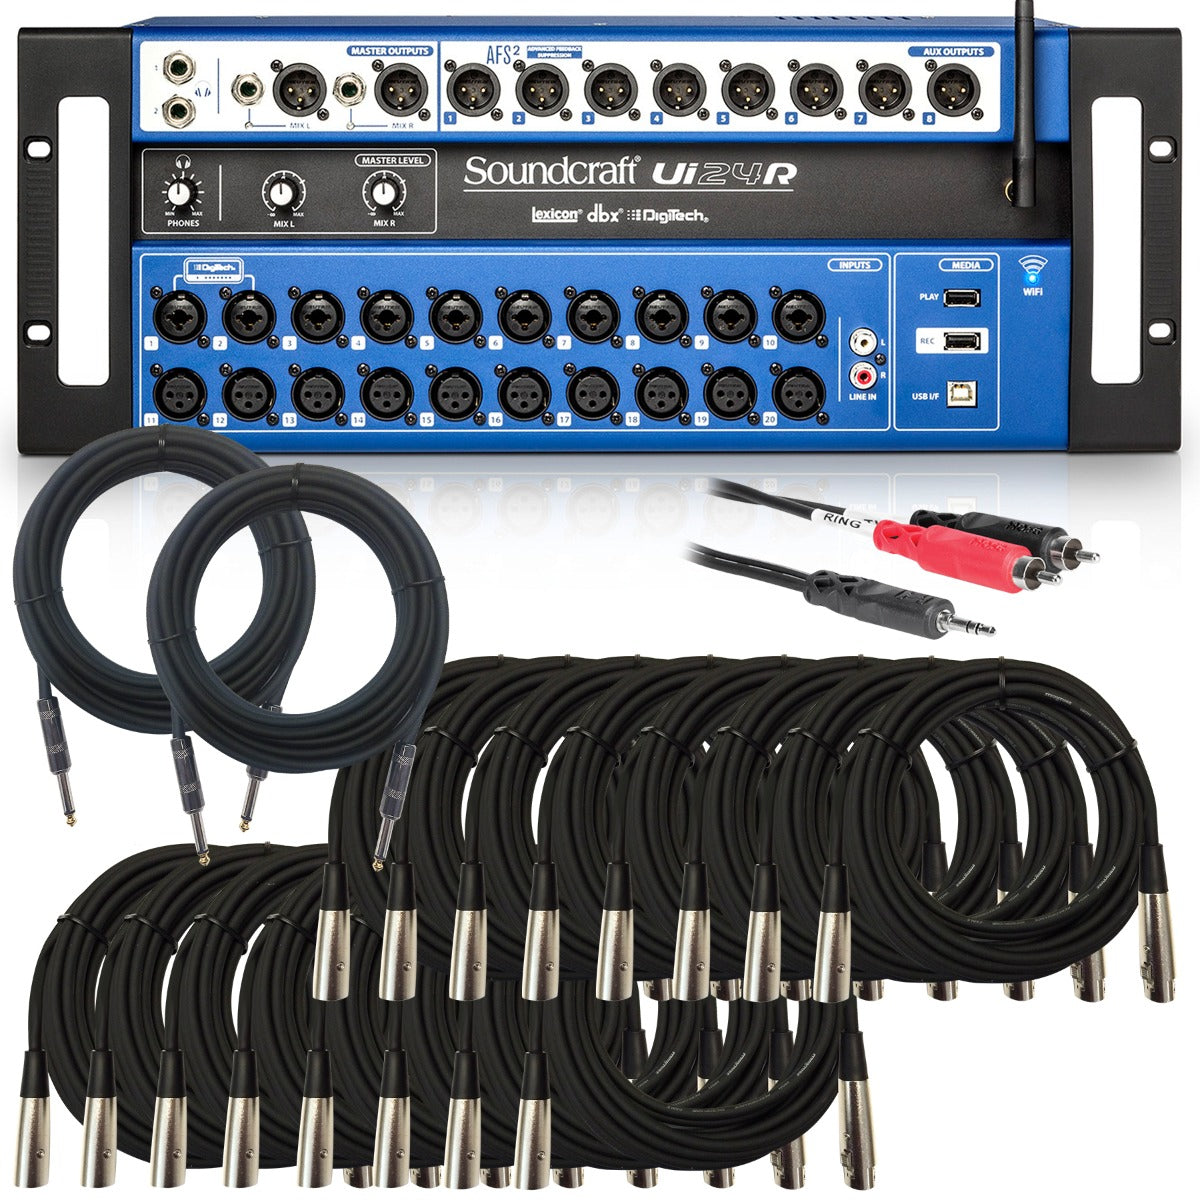 Collage of the components in the Soundcraft Ui24R Remote-Controlled Digital Mixer CABLE KIT bundle